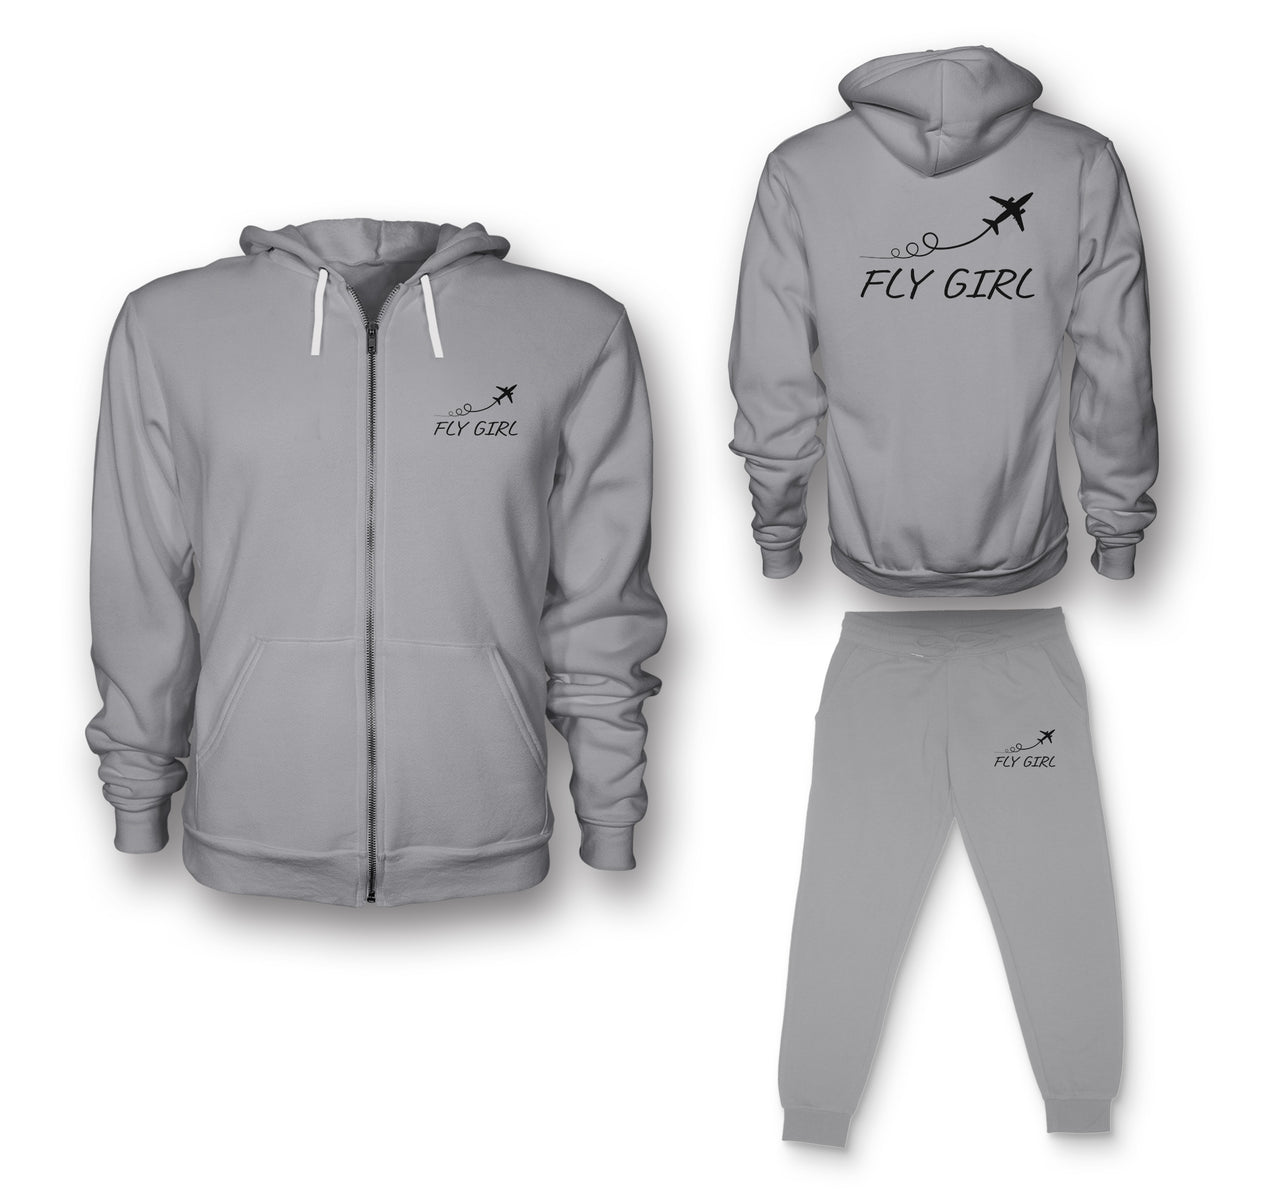 Just Fly It & Fly Girl Designed Zipped Hoodies & Sweatpants Set